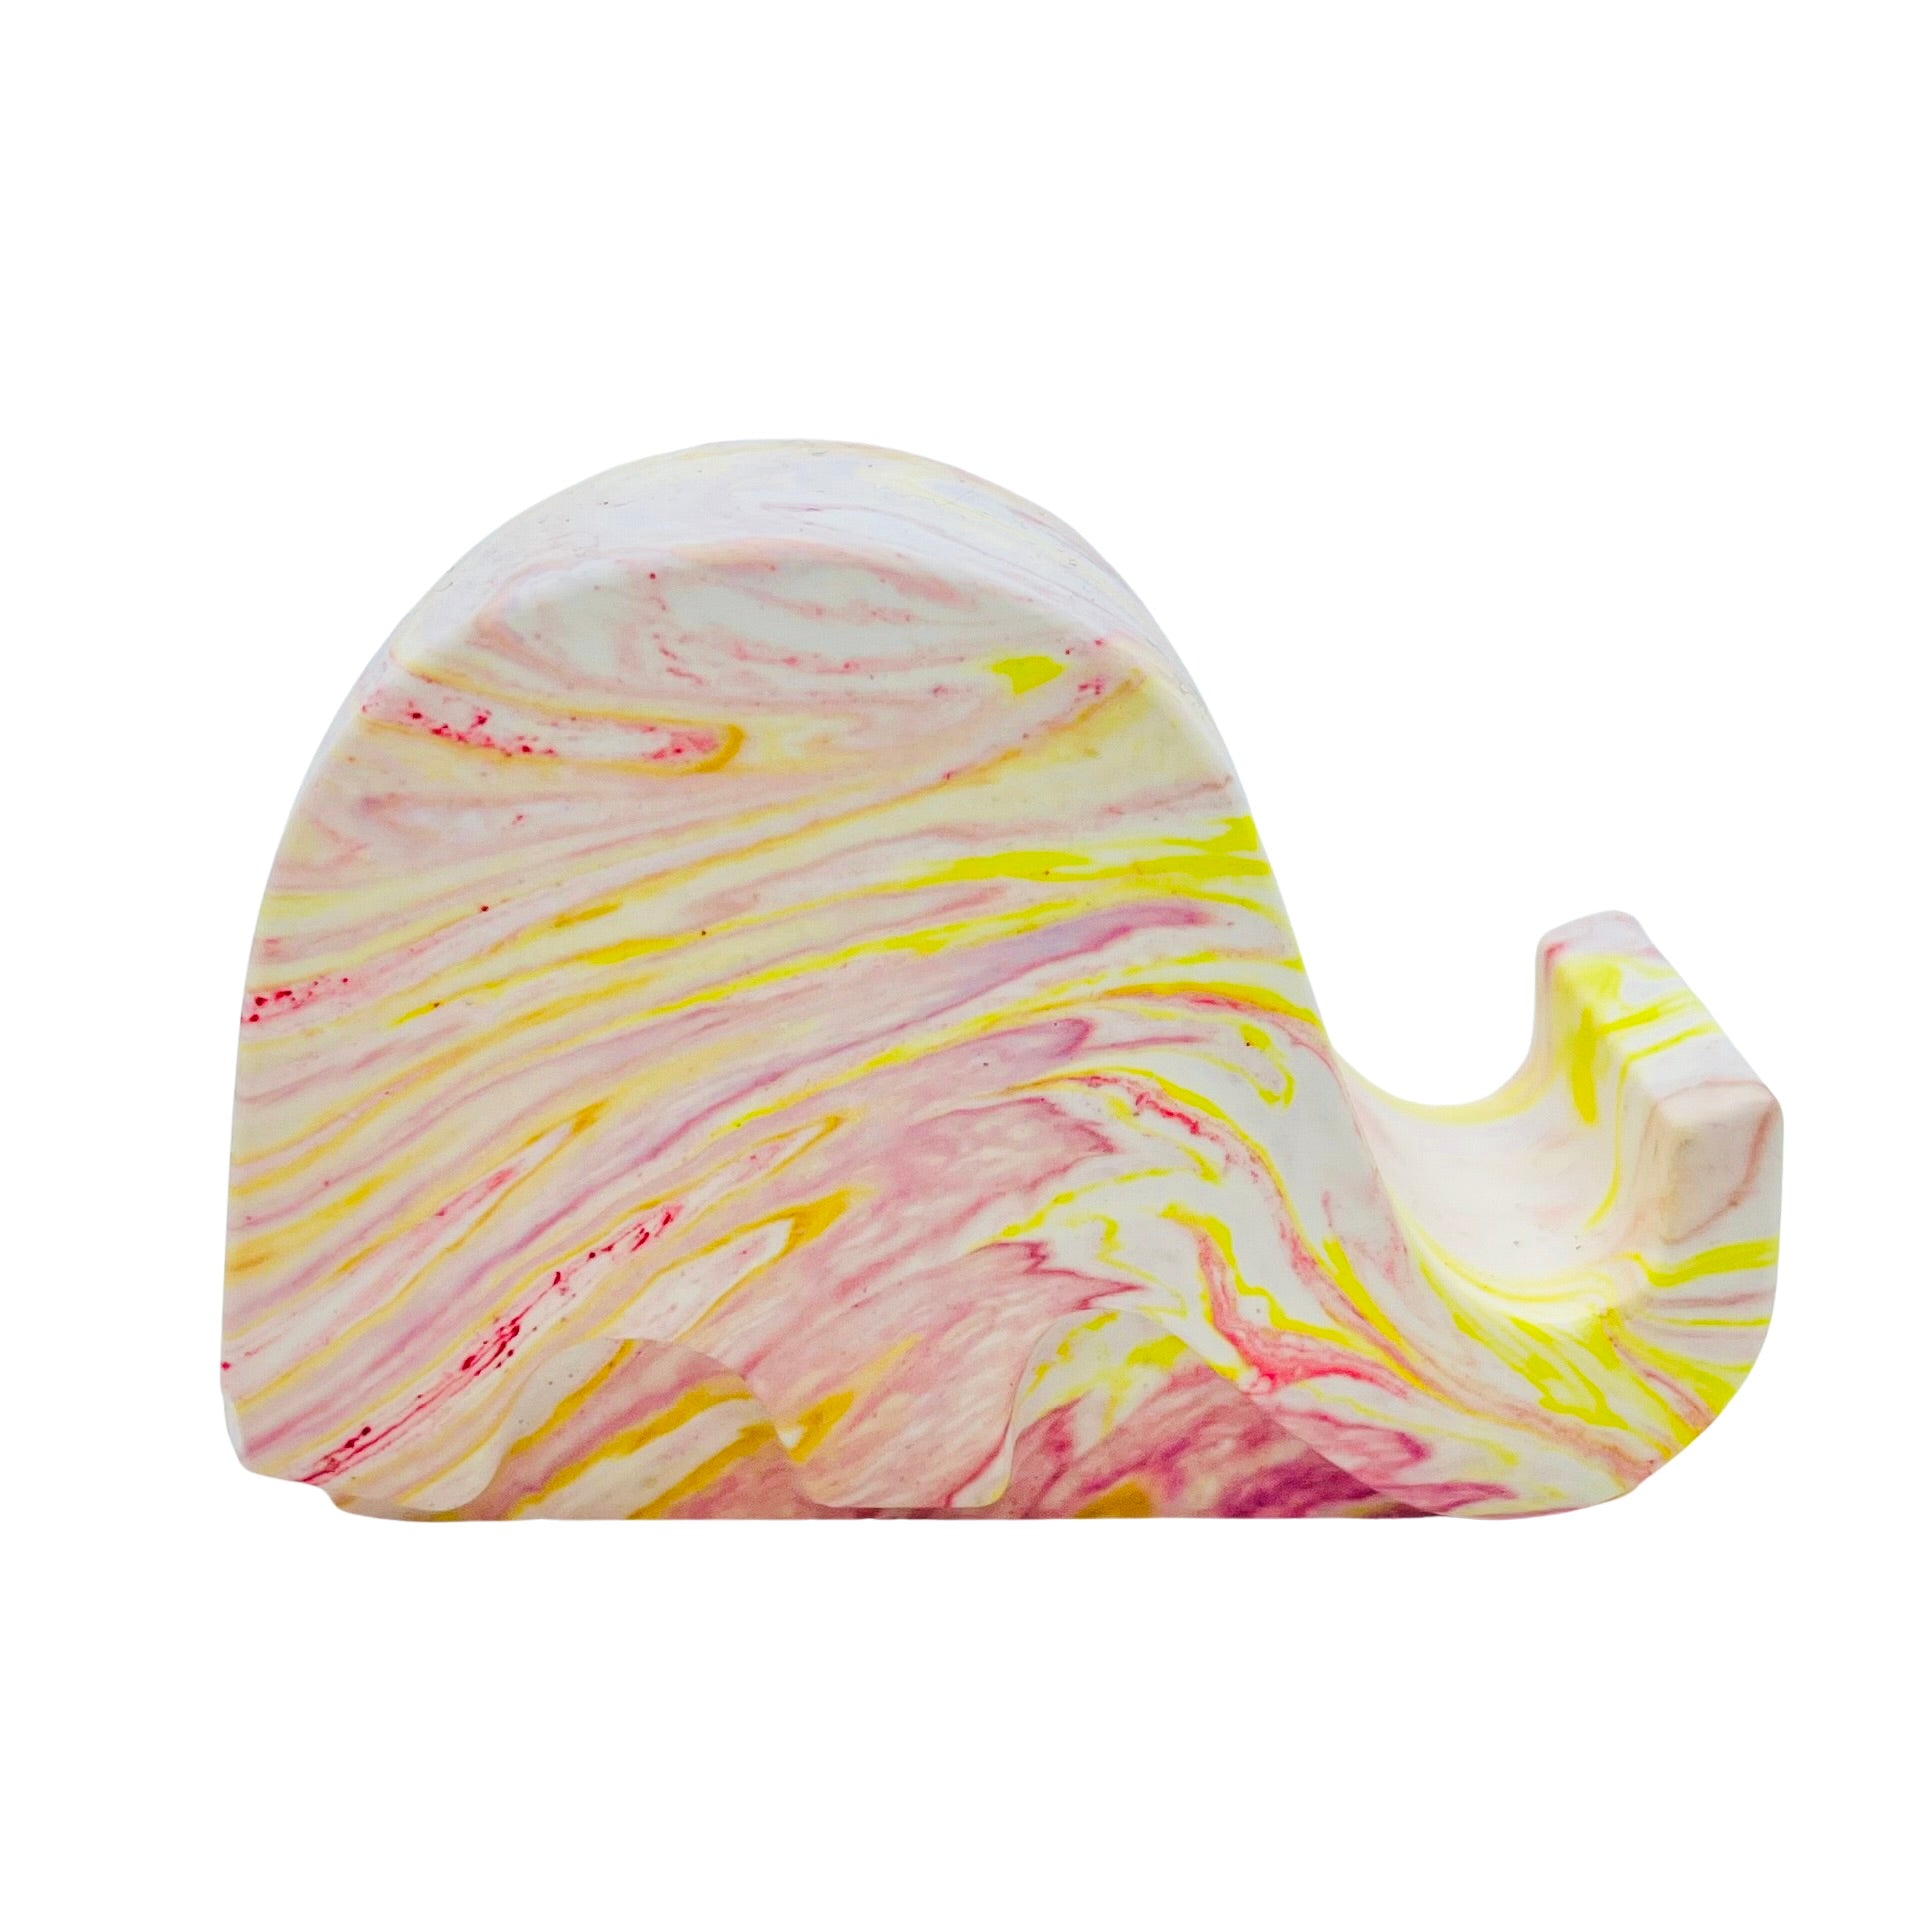 A Jesmonite elephant mobile phone stand measuring 6.5cm in length marbled with coral and yellow pigment.